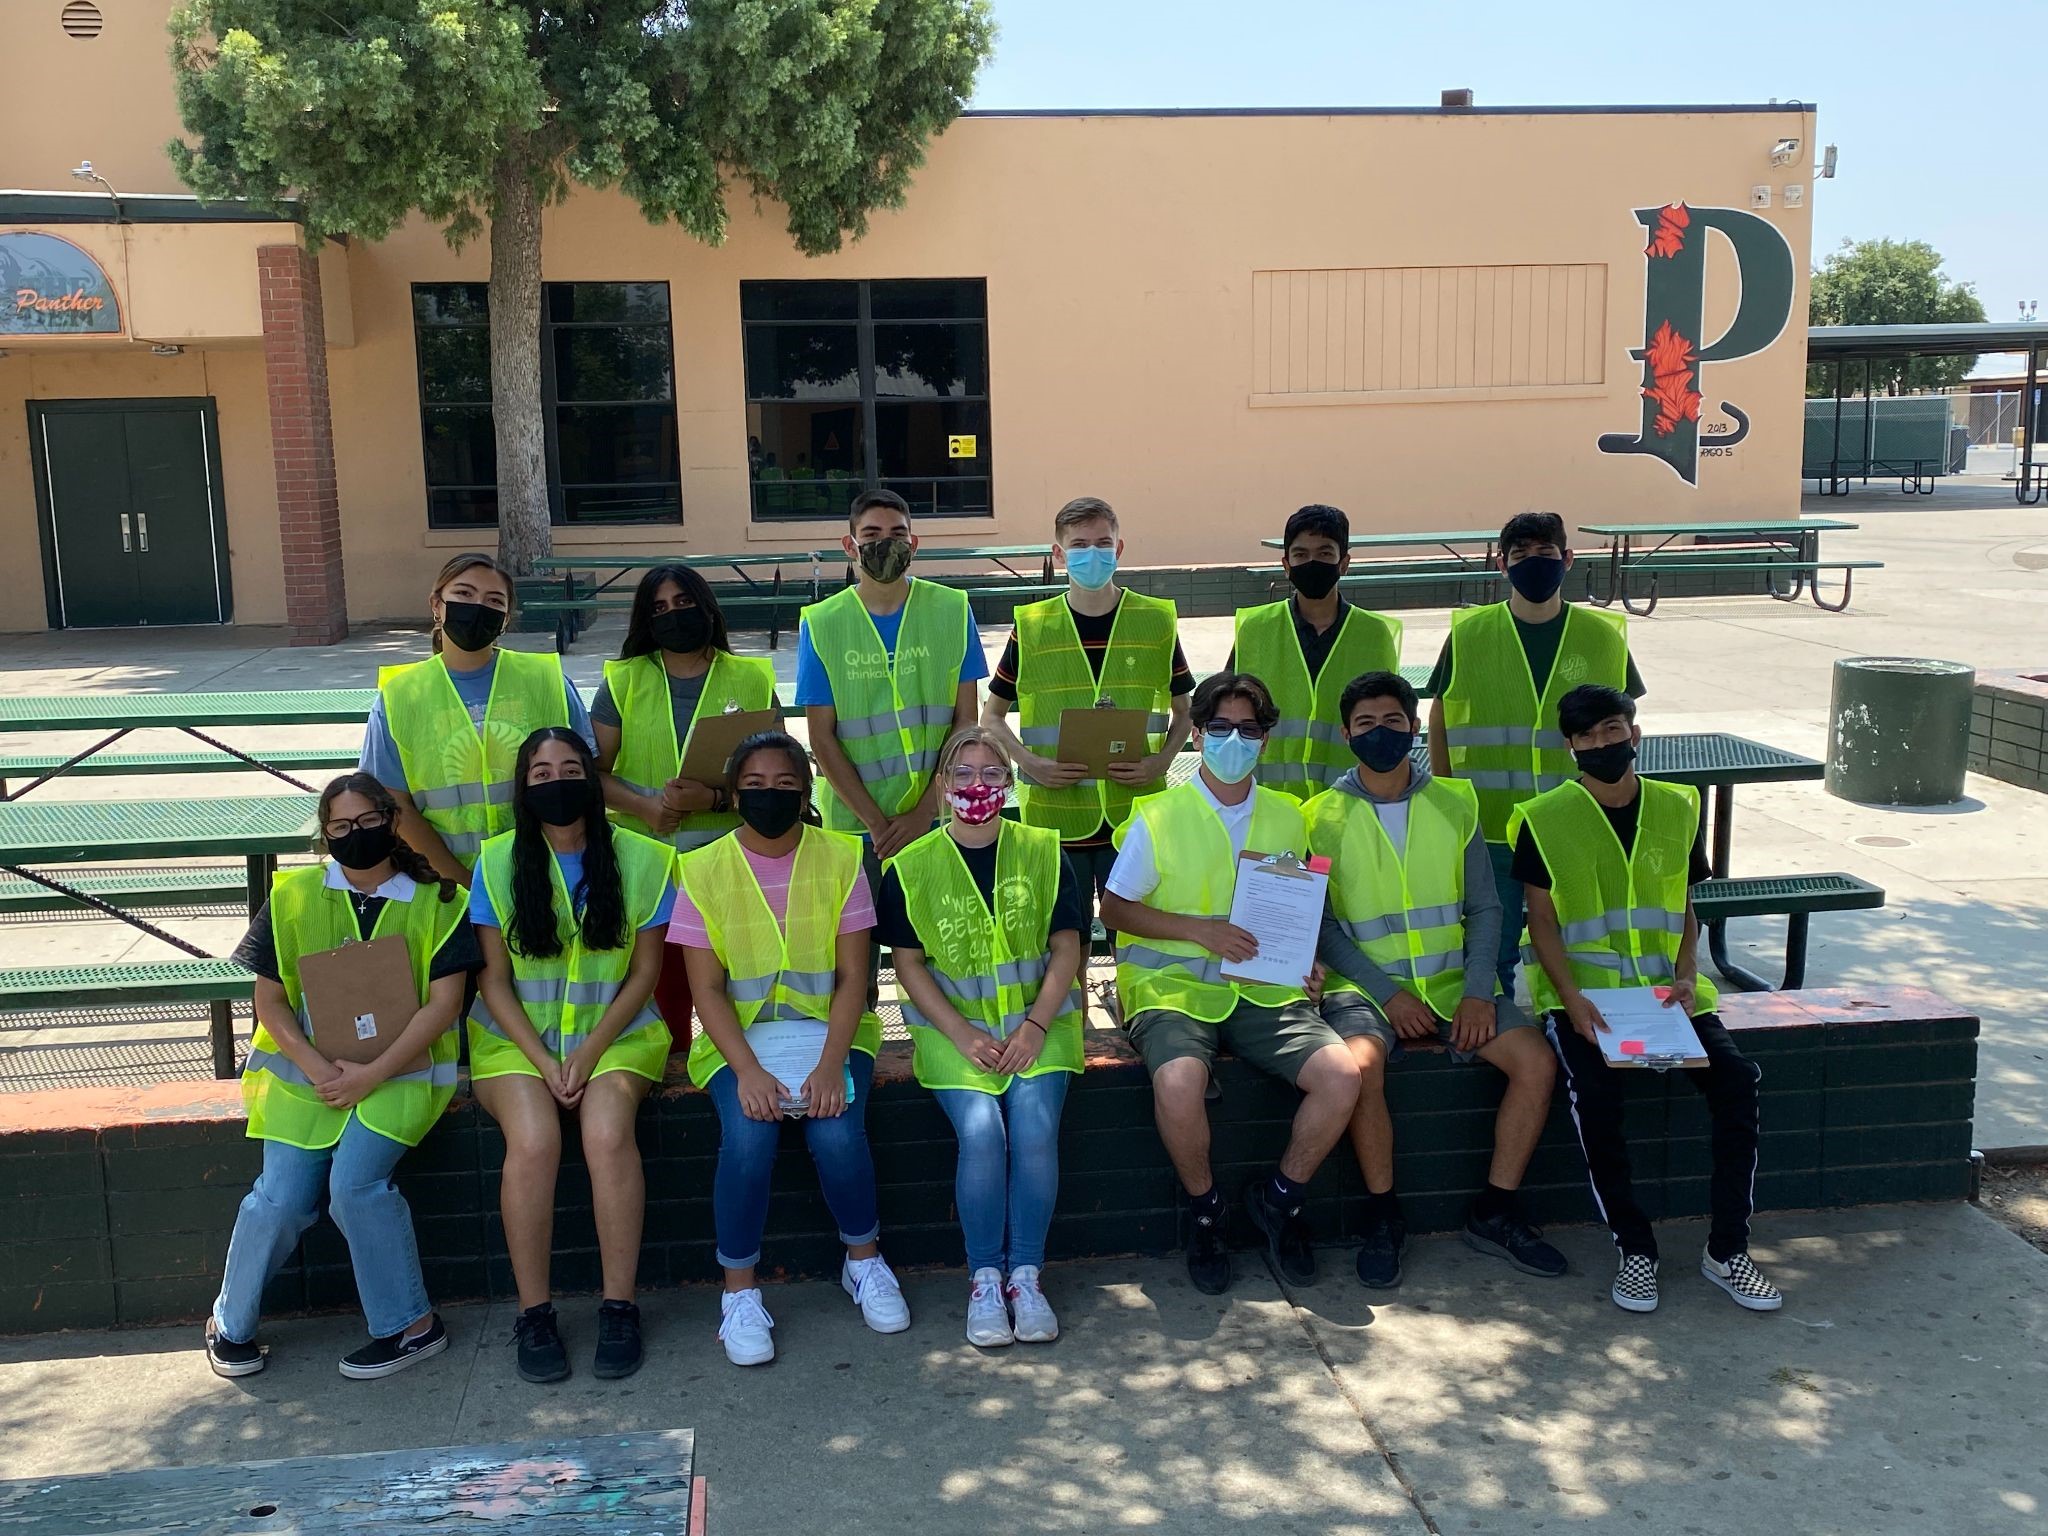 Student interns completing an infrastructure walk audit of pedestrian safety measures at Olive Elementary. 13 students wearing safety vests and COVID masks pose in front of school building.